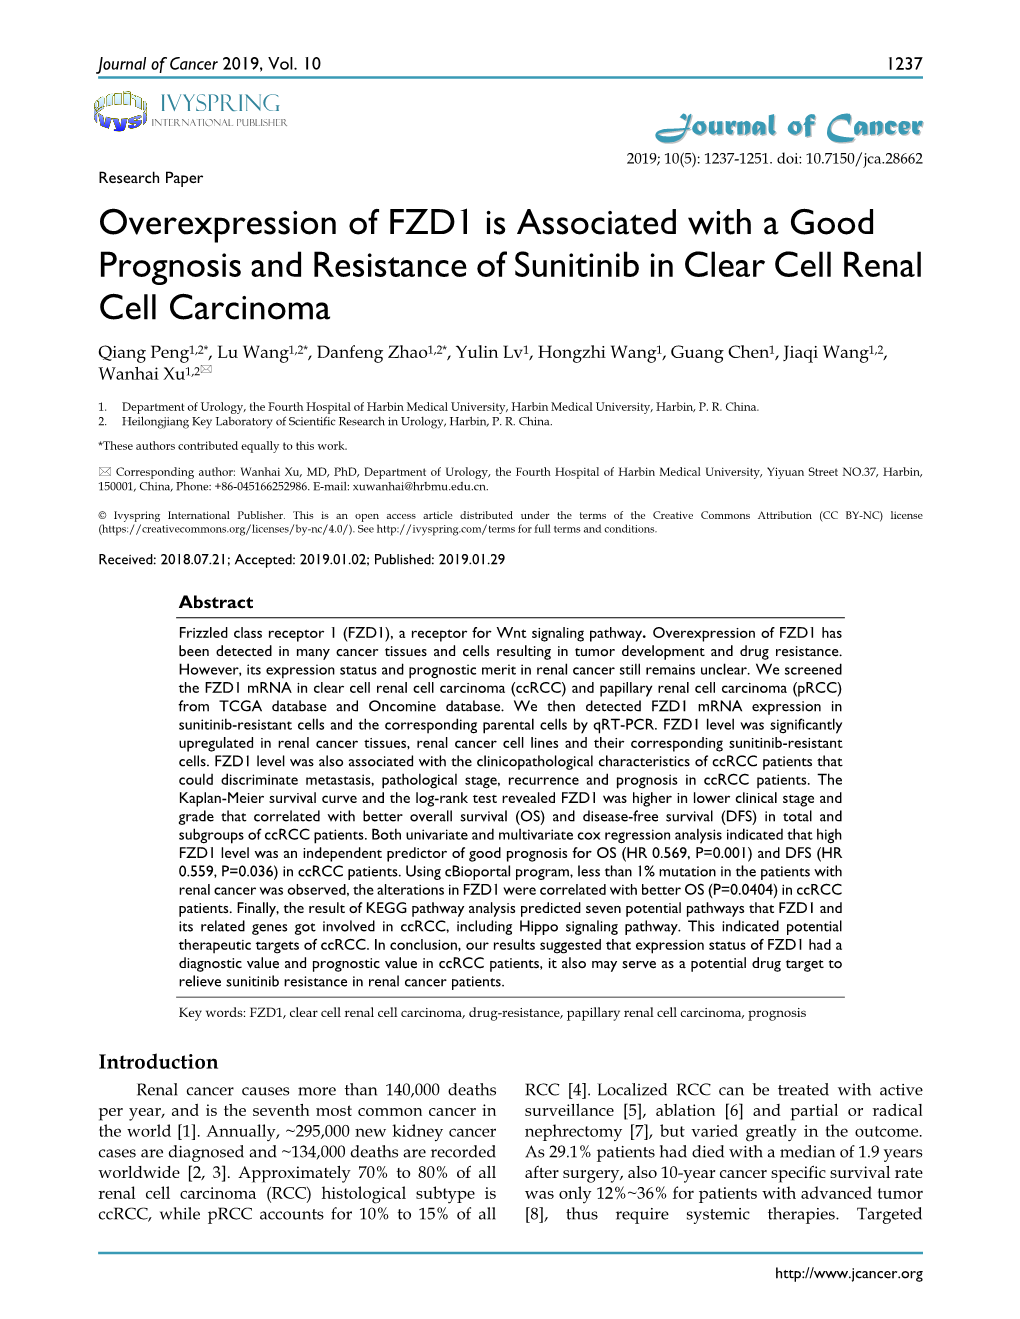 Overexpression of FZD1 Is Associated with a Good Prognosis And